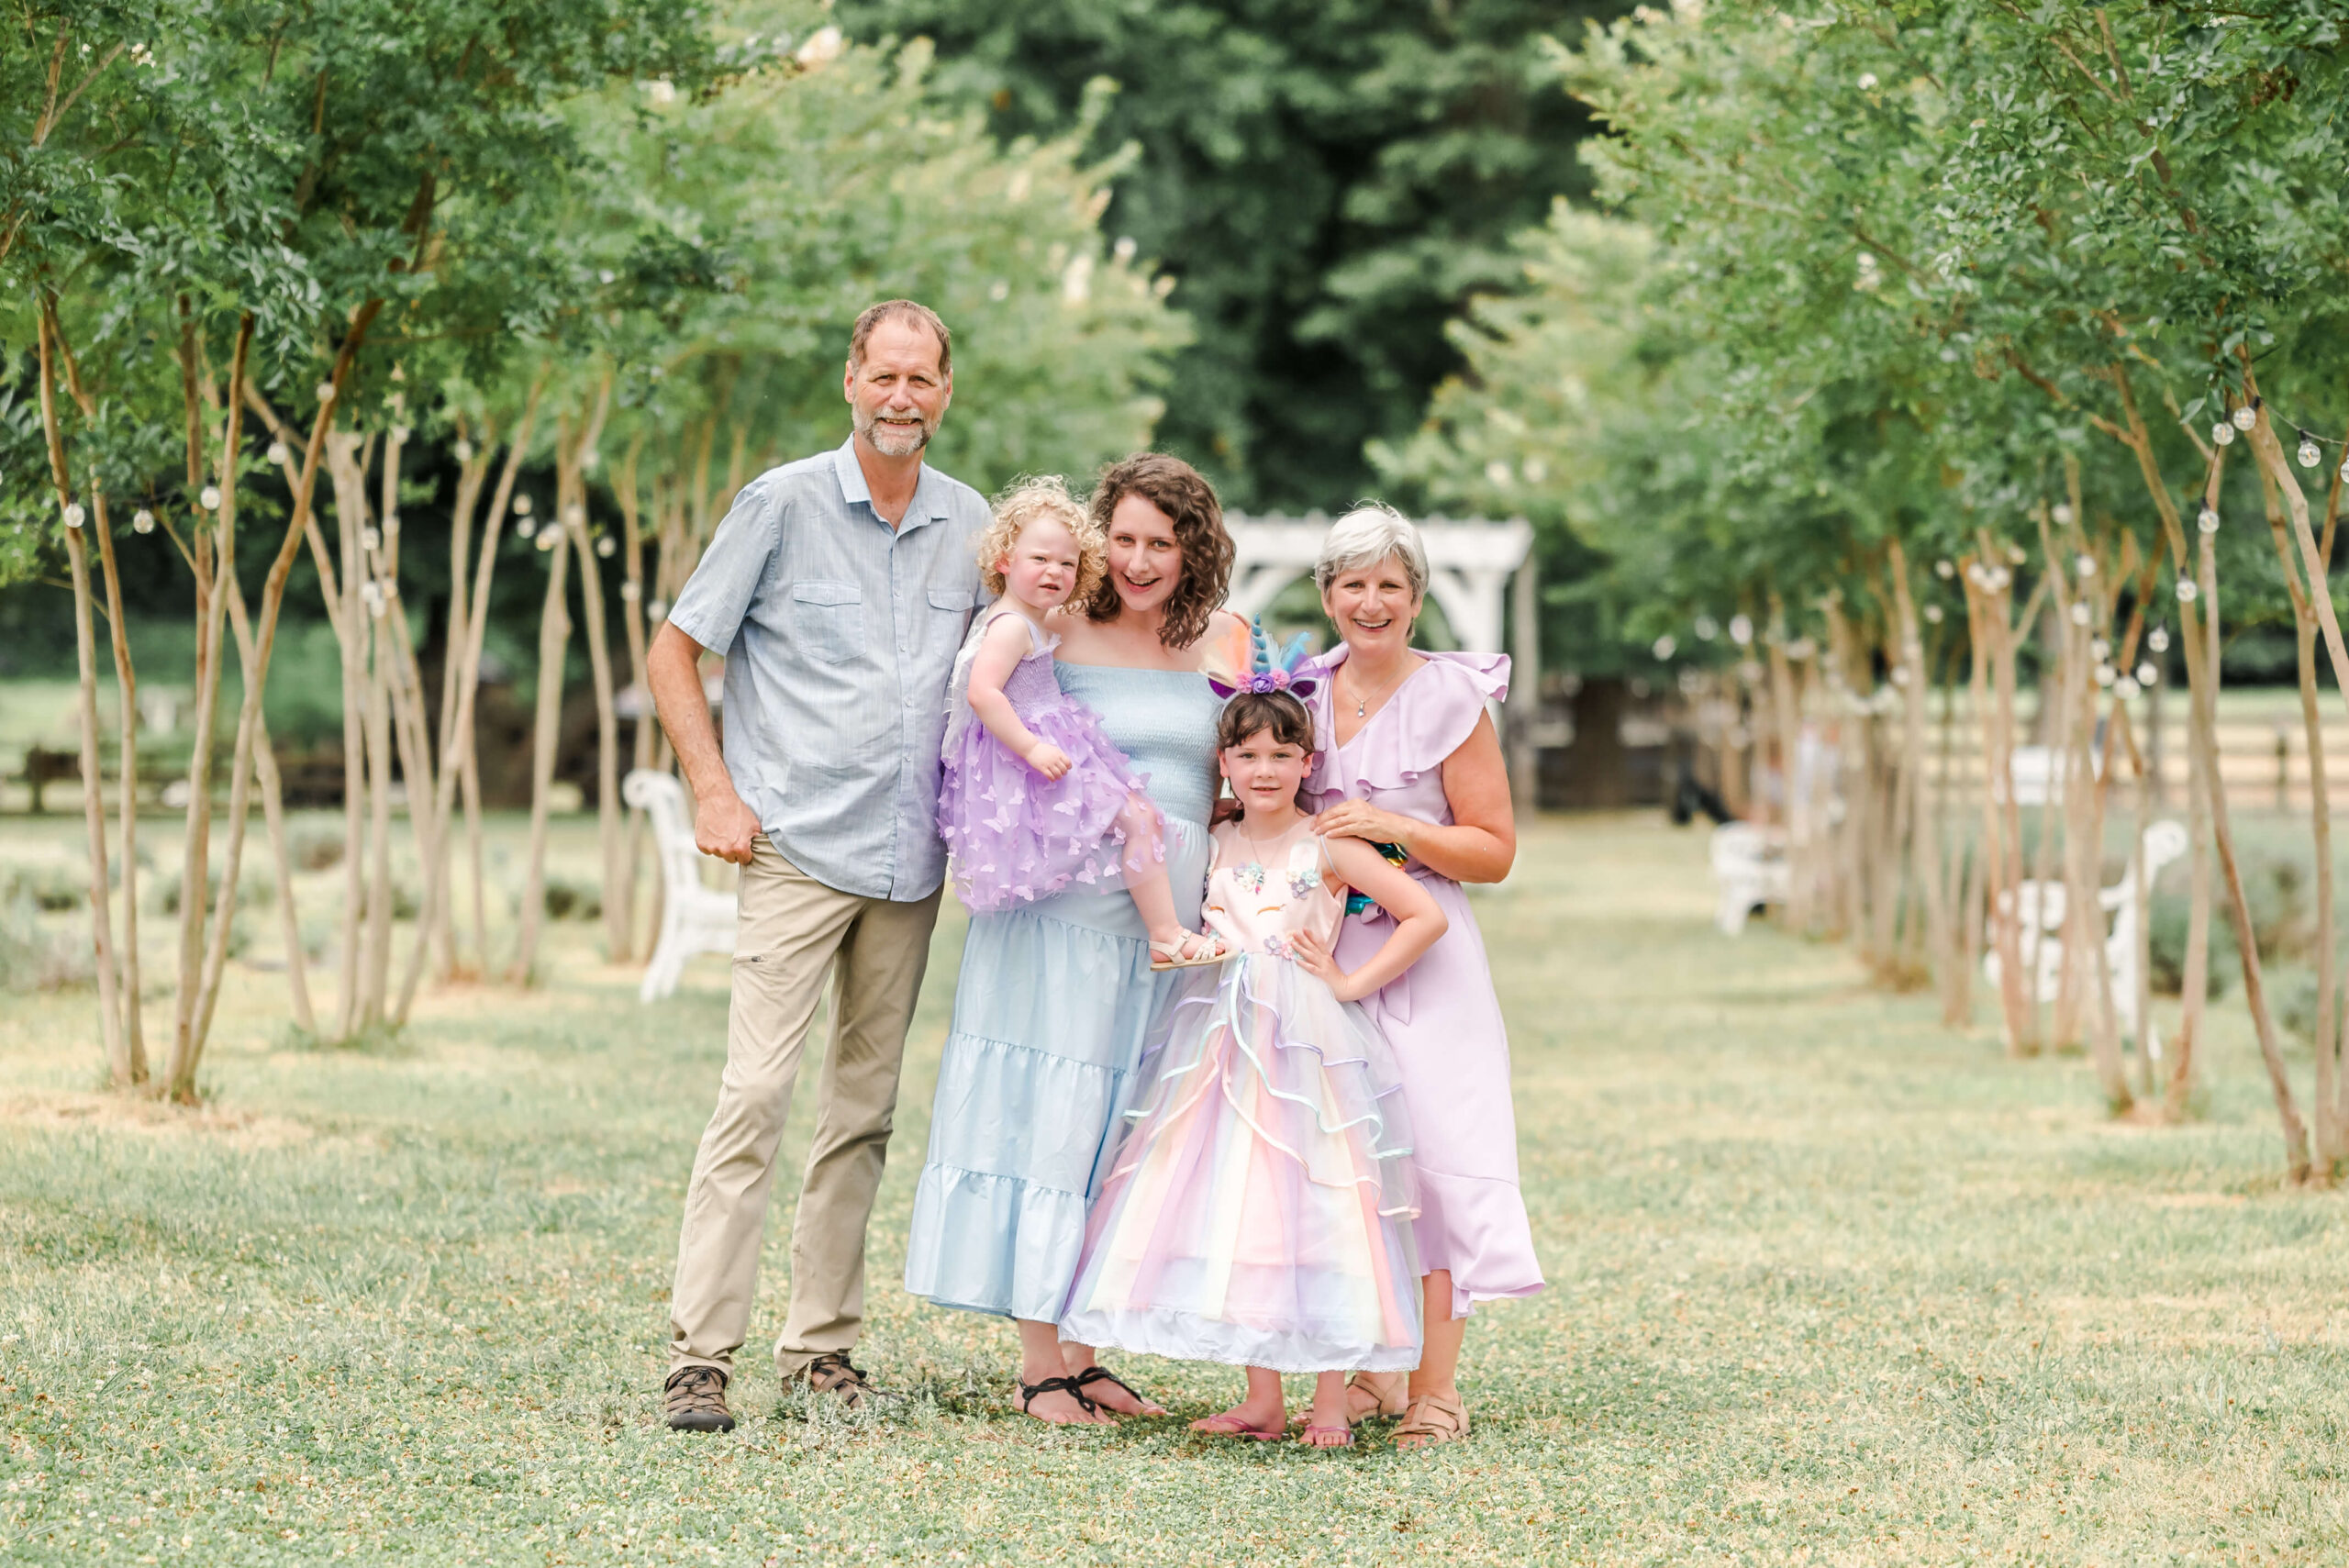 A family stands together between two rows of trees. You can see the grandparents, mom, and two daughters. All are dressed in light blue and purple. The mom could look for nannies in Virginia Beach for her girls.